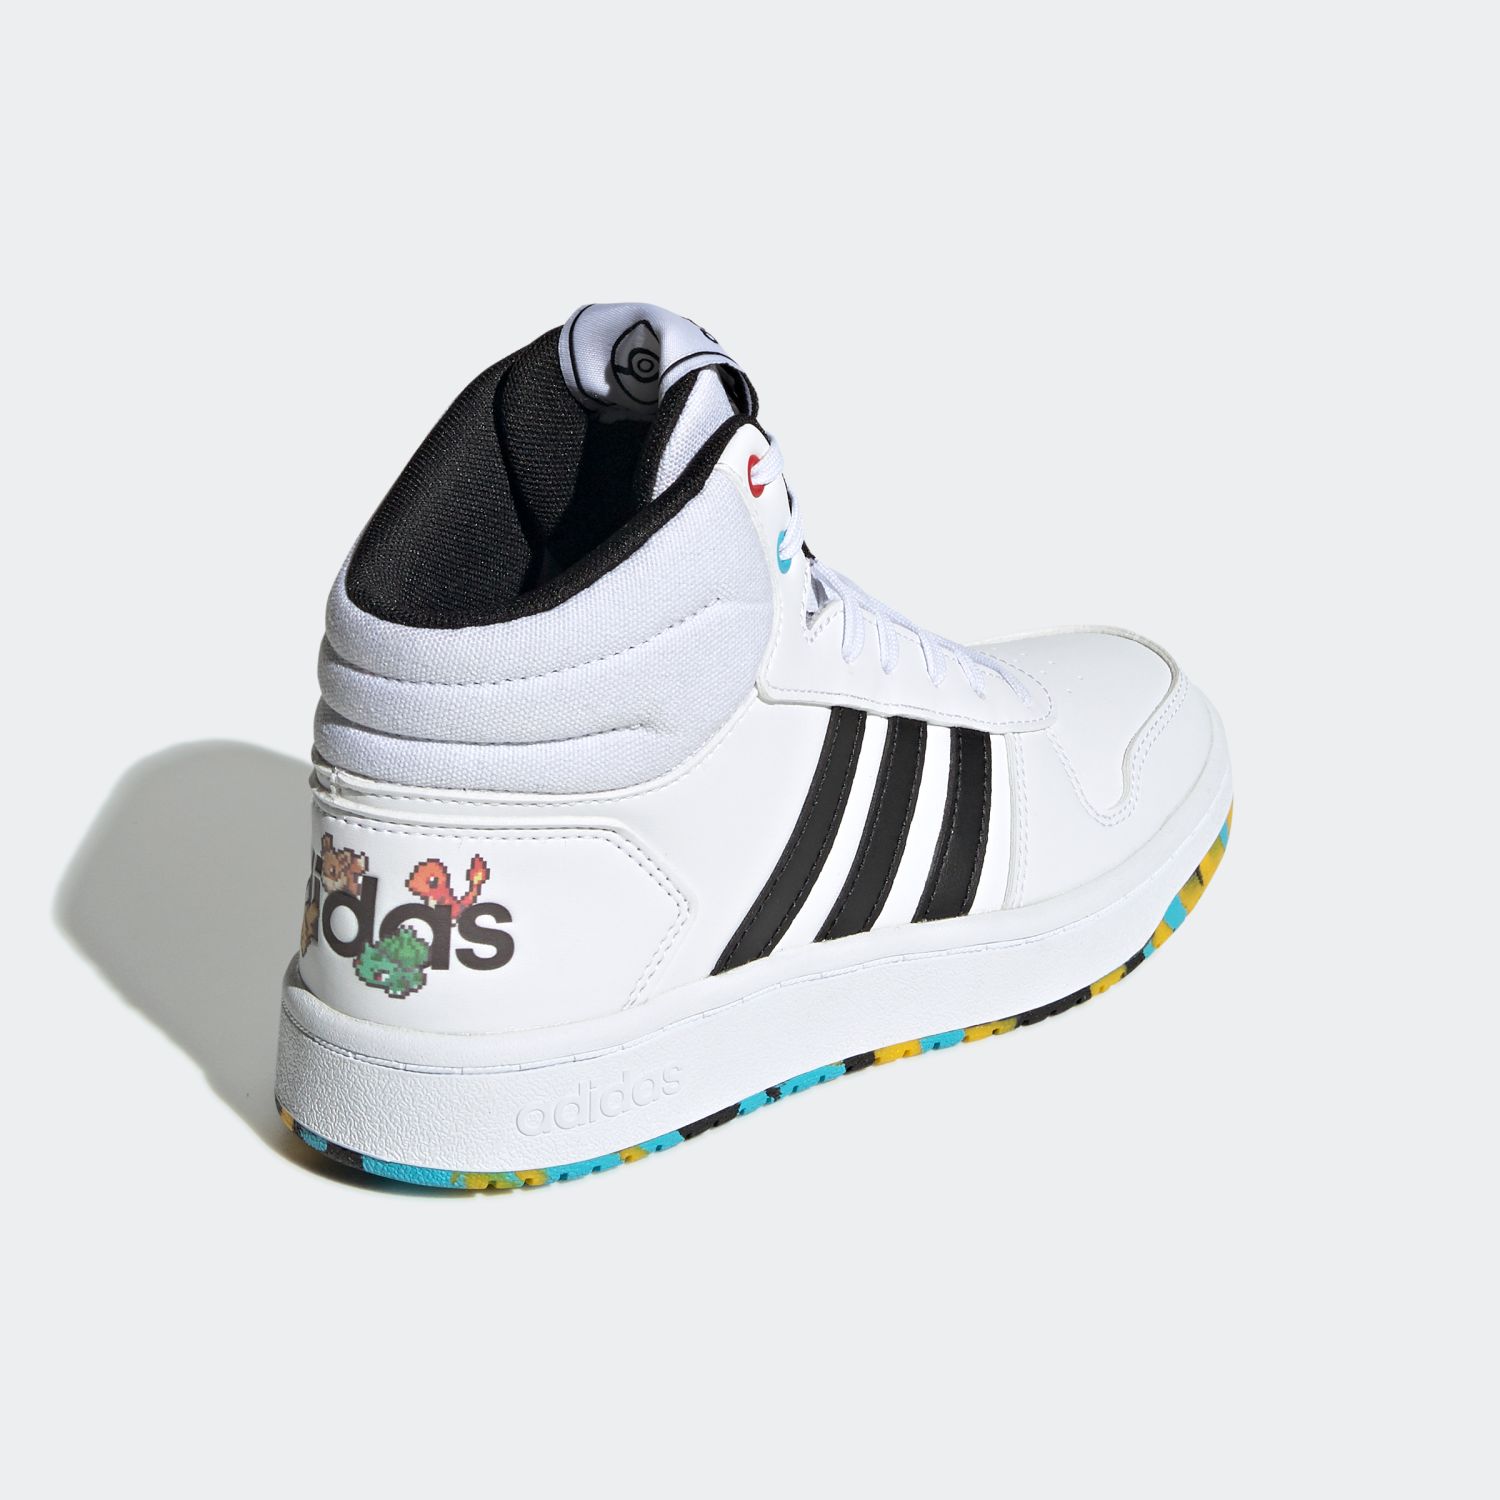 Adidas x Pokémon sneakers and more 